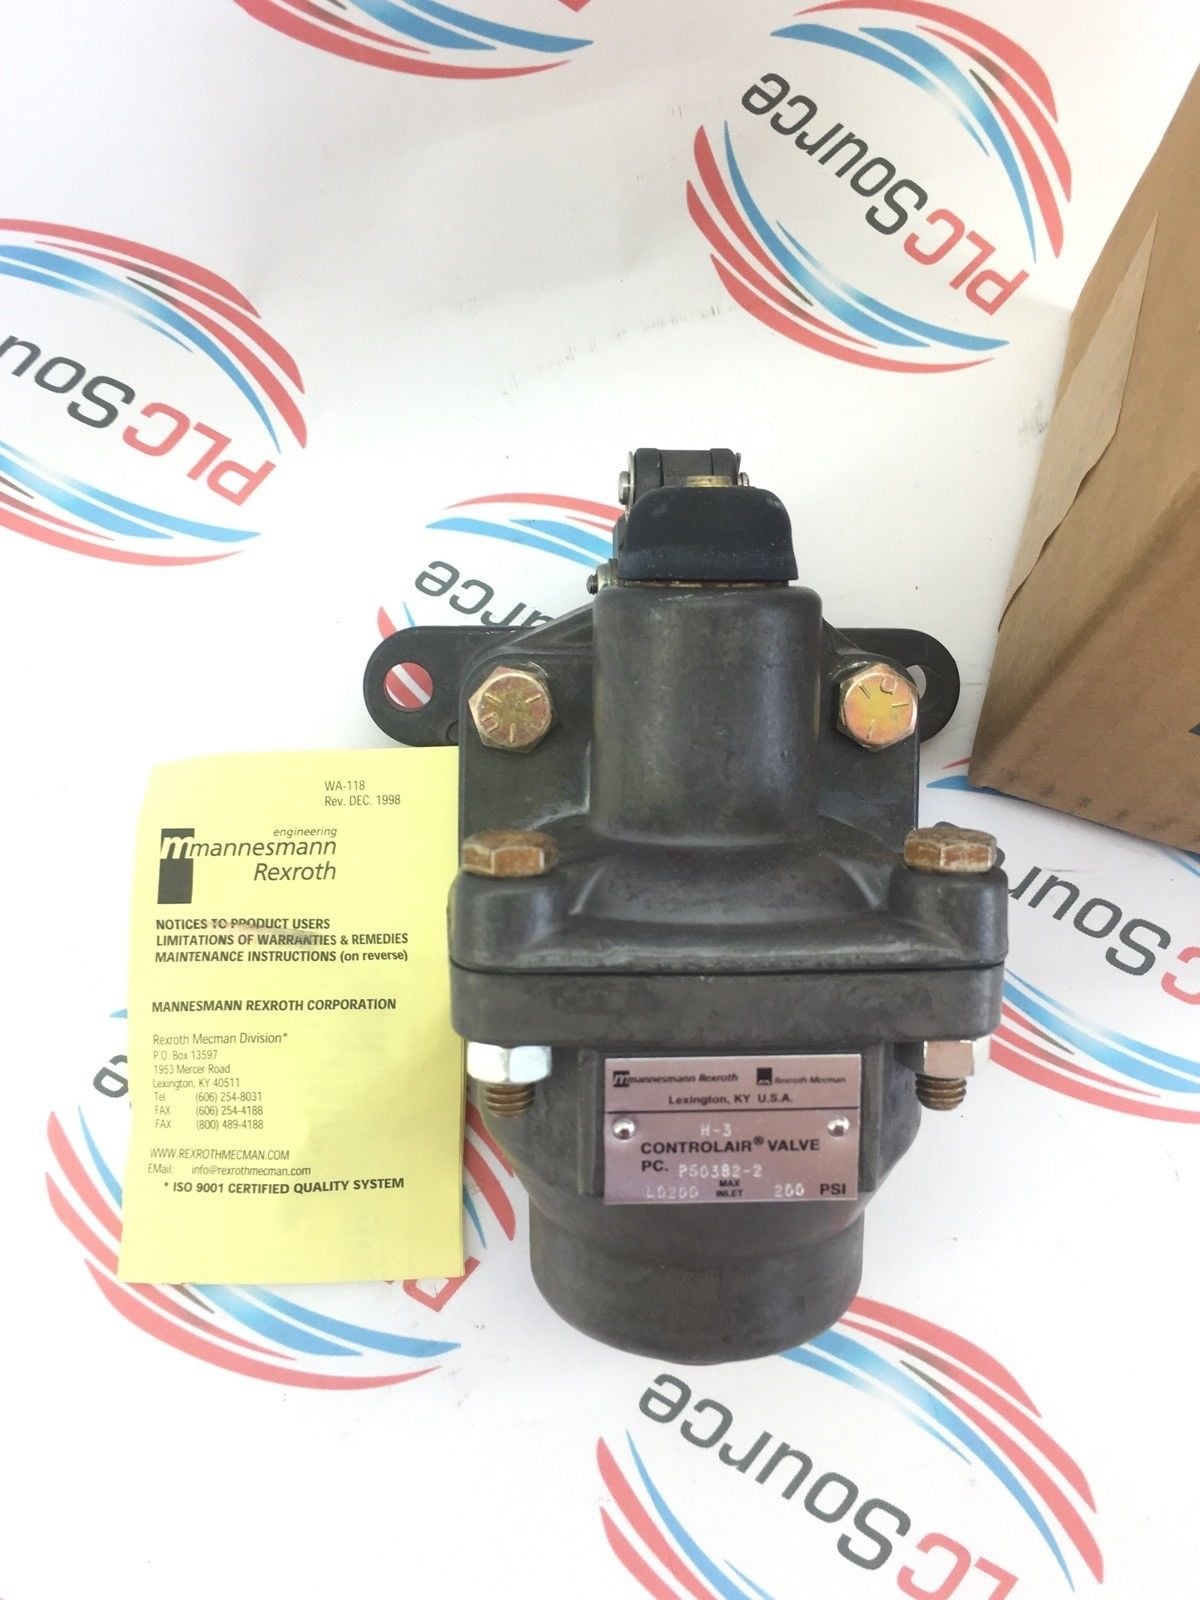 Details about   REXROTH P68973-3030 200PSI AS PICTURED UNMP 